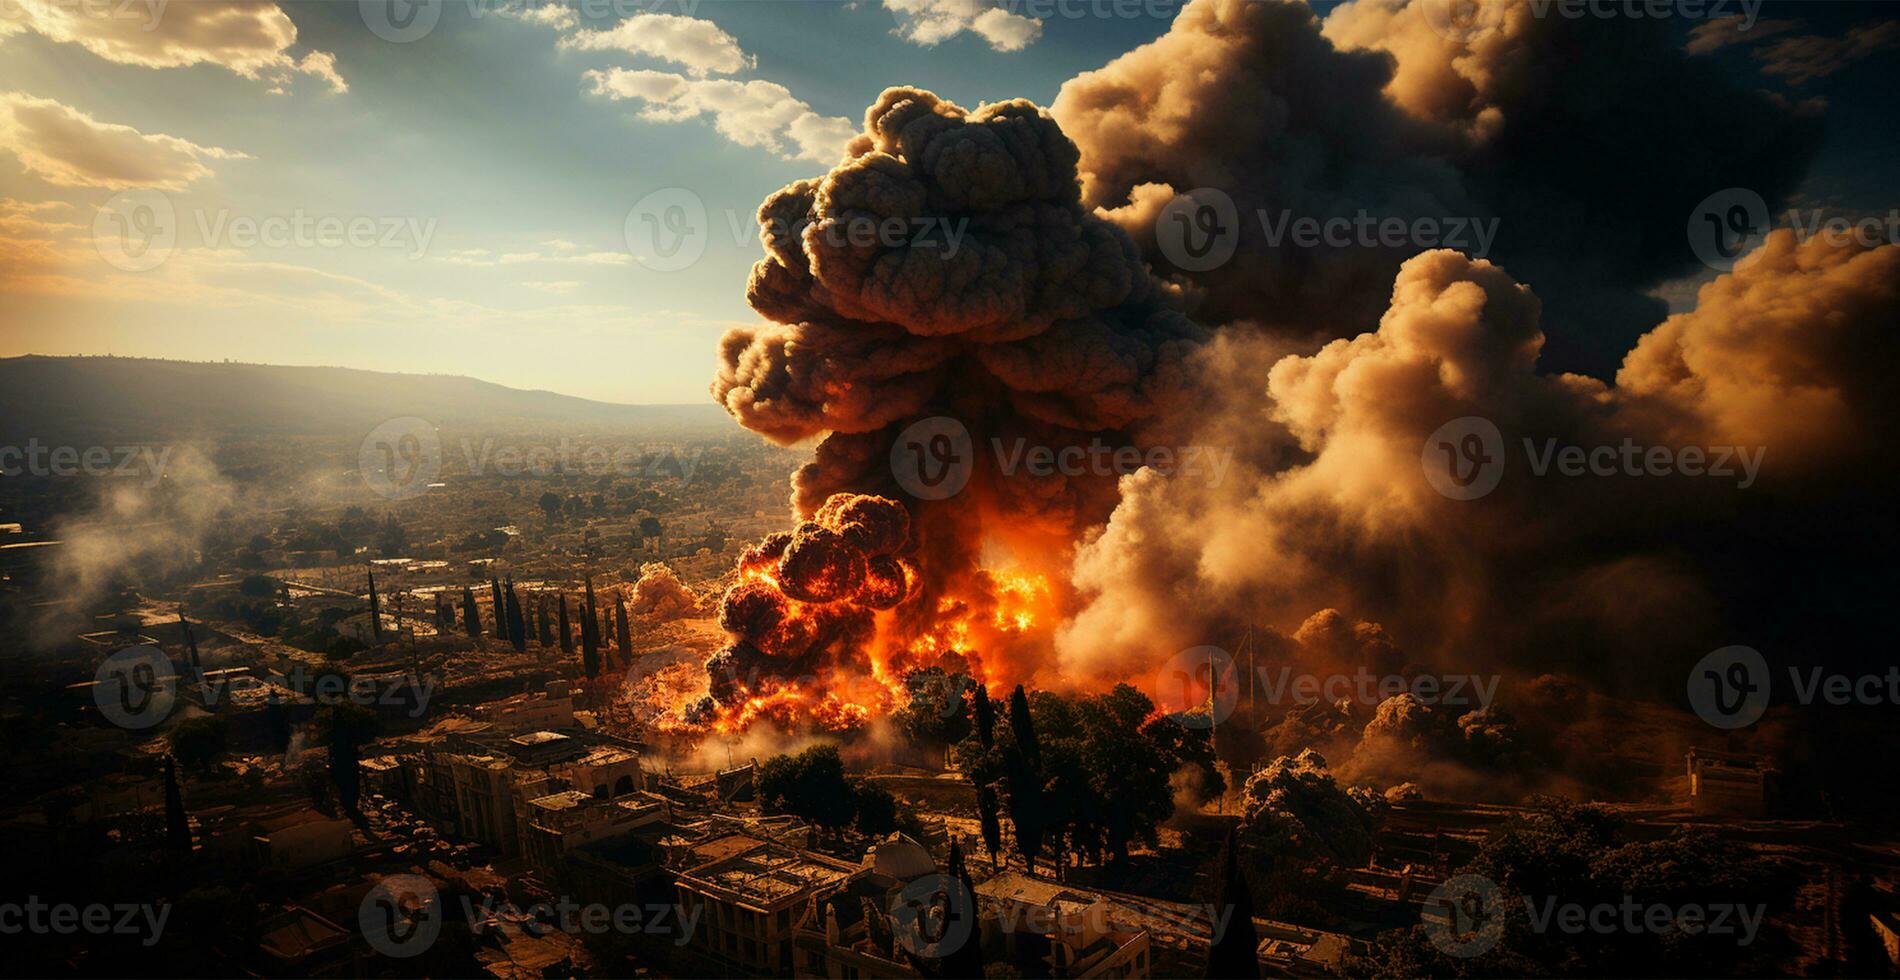 Bomb explosion in Palestine, Israeli attack on Gaza, eastern war - AI generated image photo